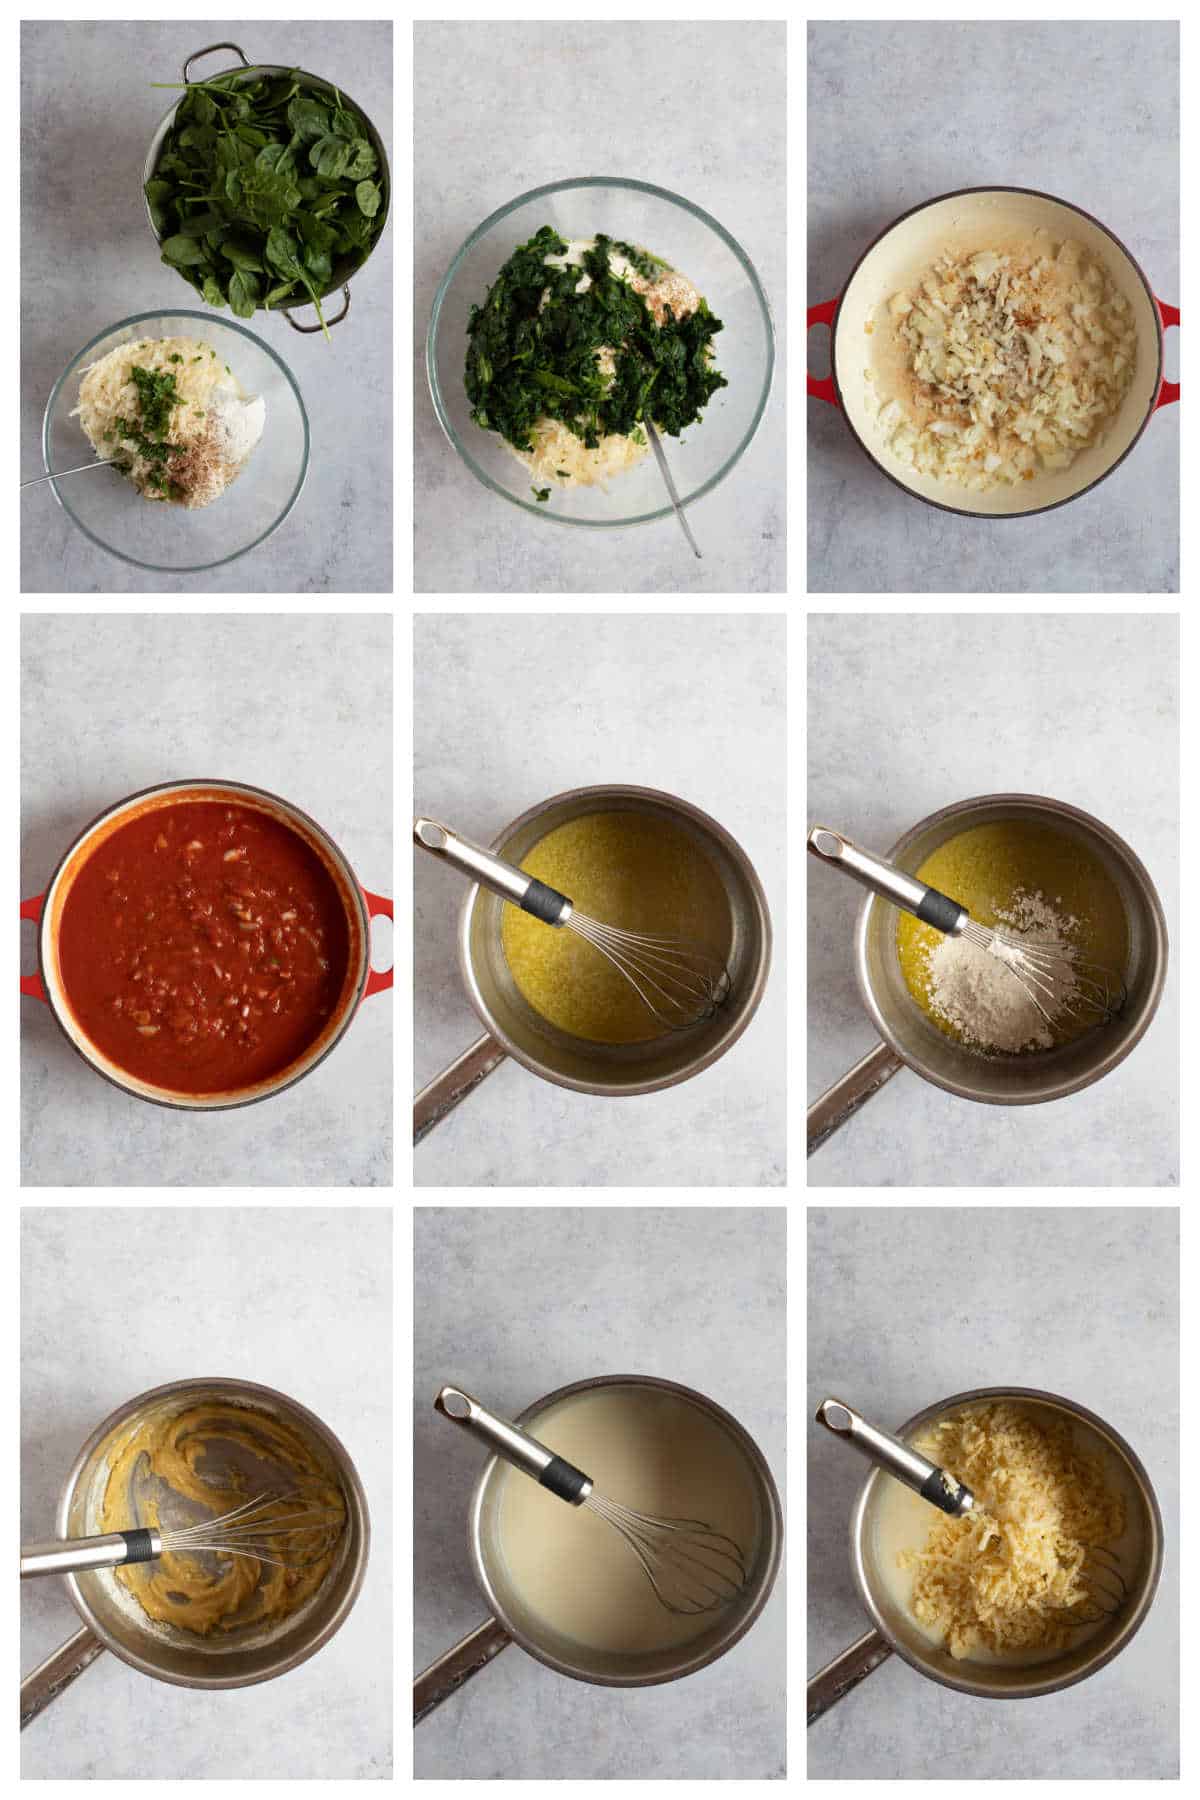 Step by step photo instruction collage for making spinach and ricotta cannelloni.